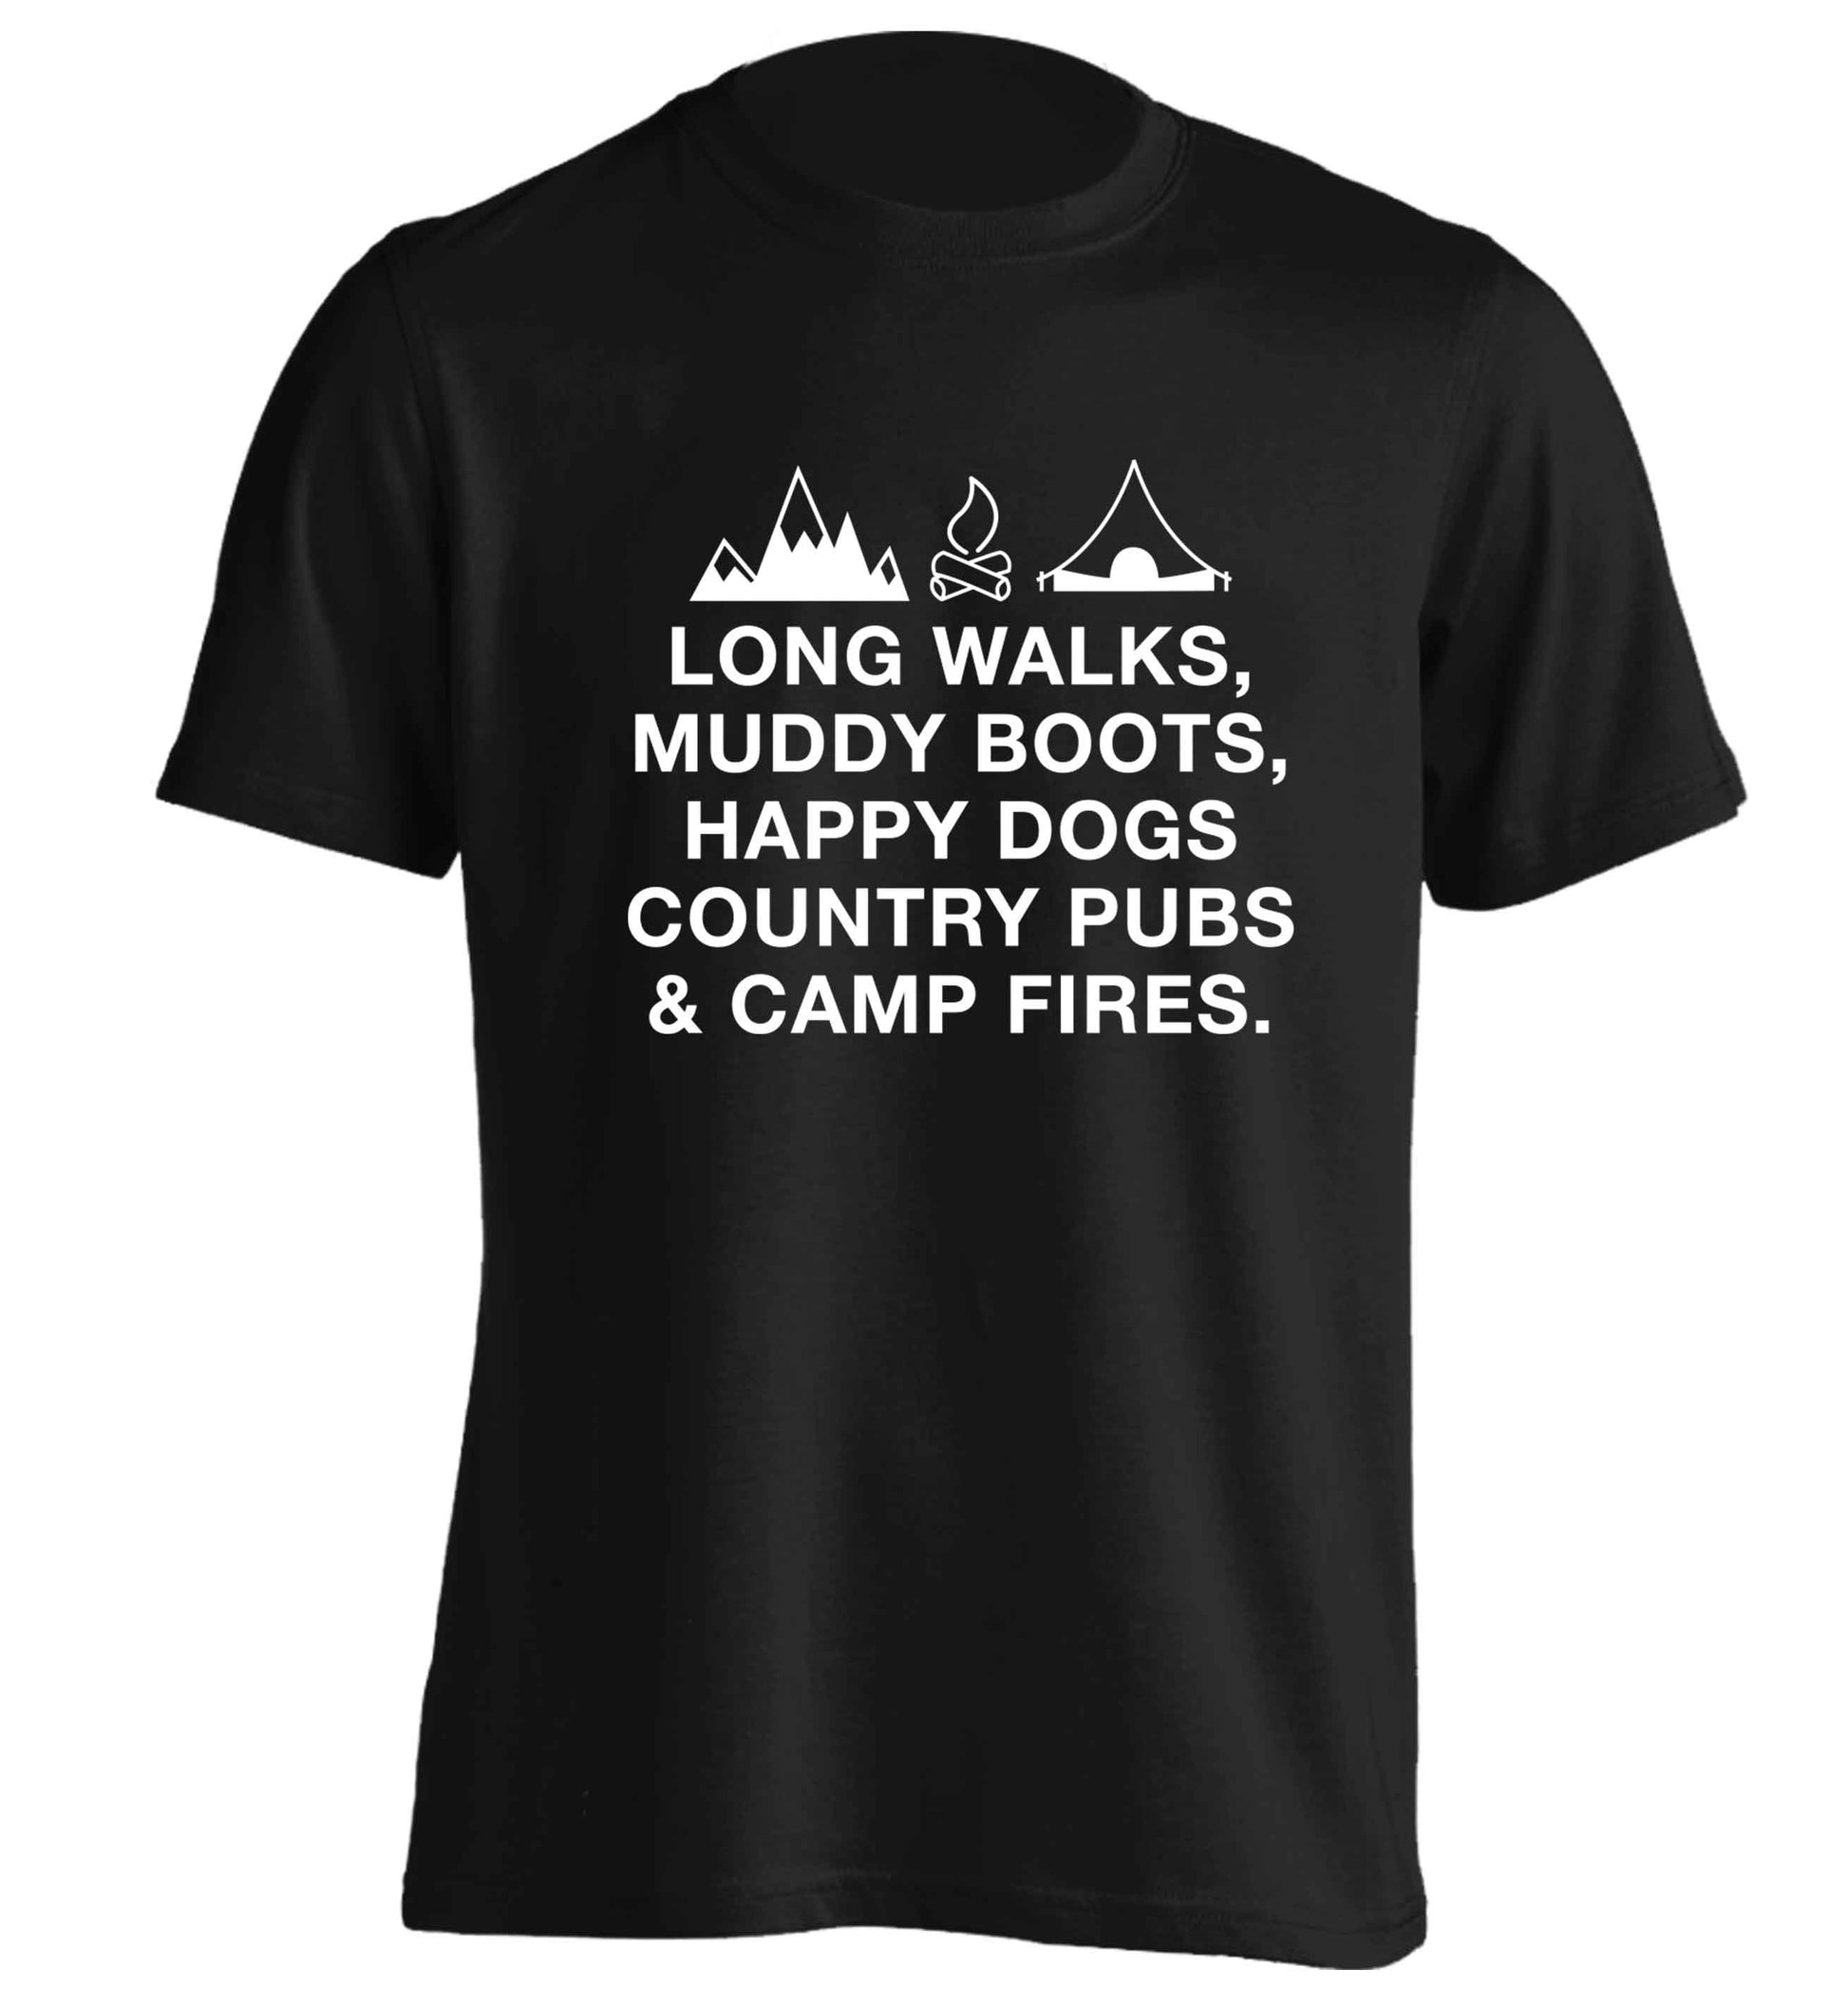 Long walks muddy boots happy dogs country pubs and camp fires adults unisex black Tshirt 2XL